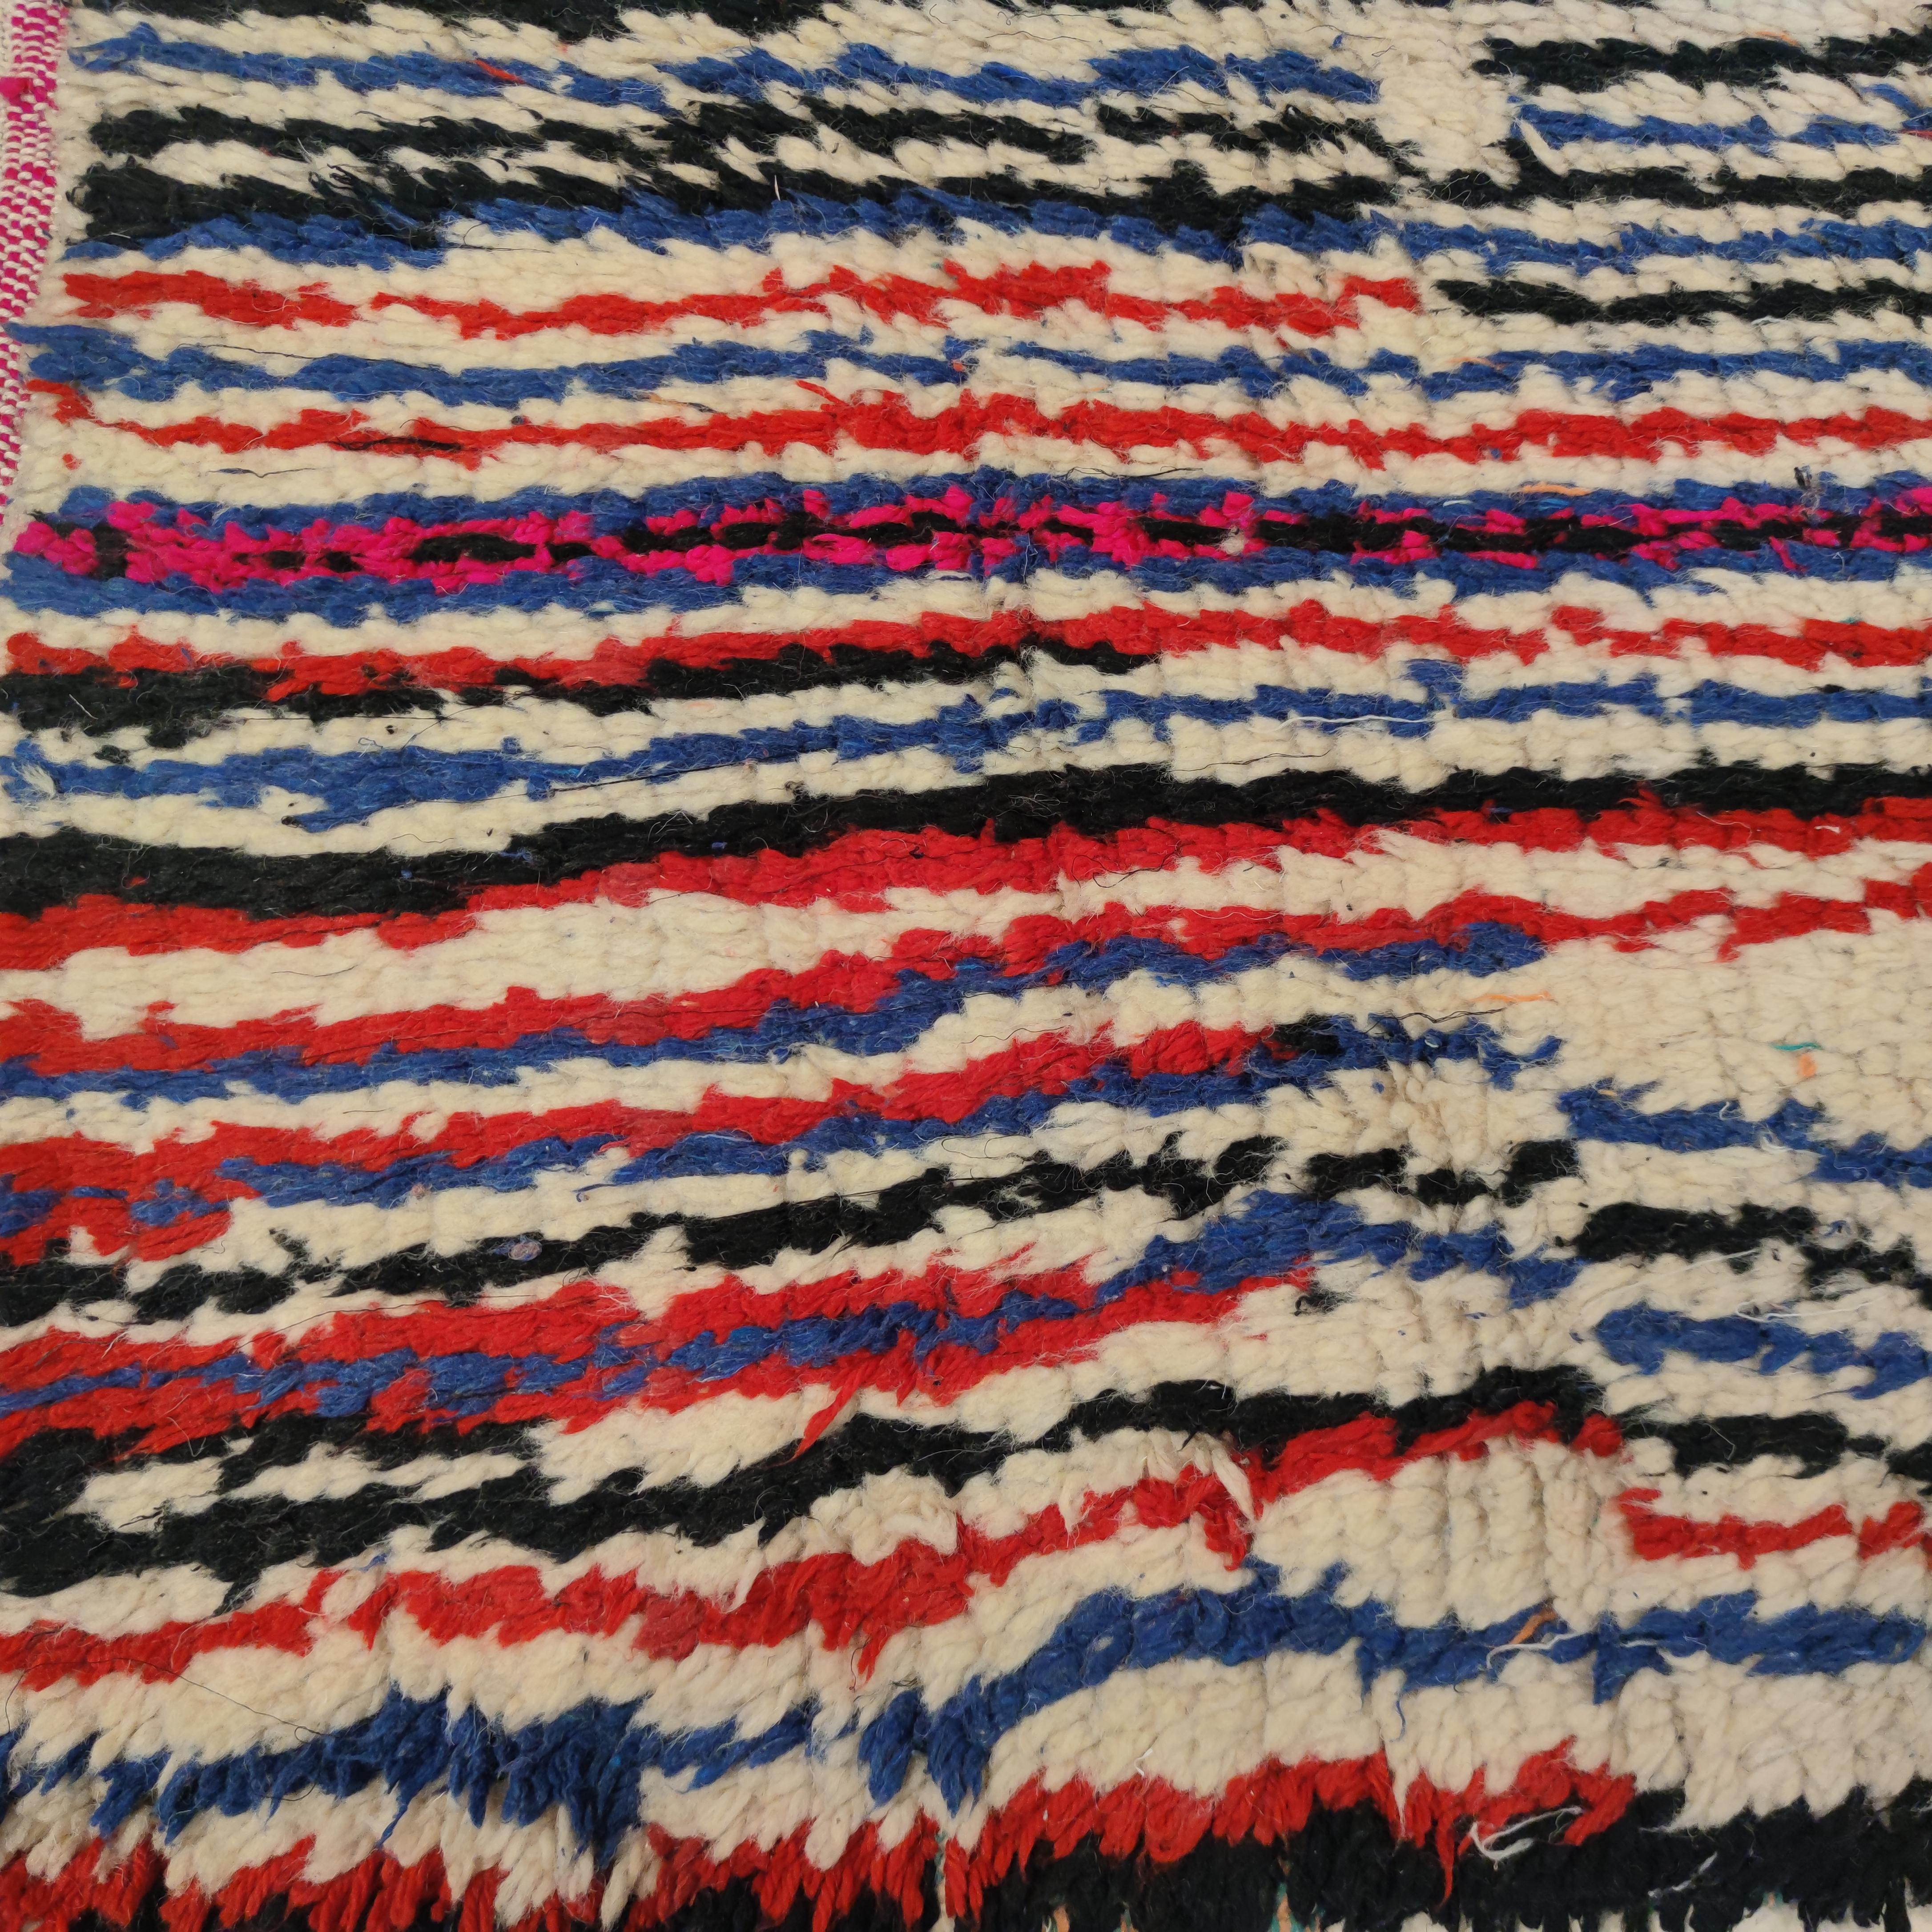 A truly unusual Azilal rug, quite finely knotted in wool on a foundation of industrial cotton, with a pattern of vertical stripes in black, blue and red against an ivory background. A work of post-modern abstraction that is yet another variation of